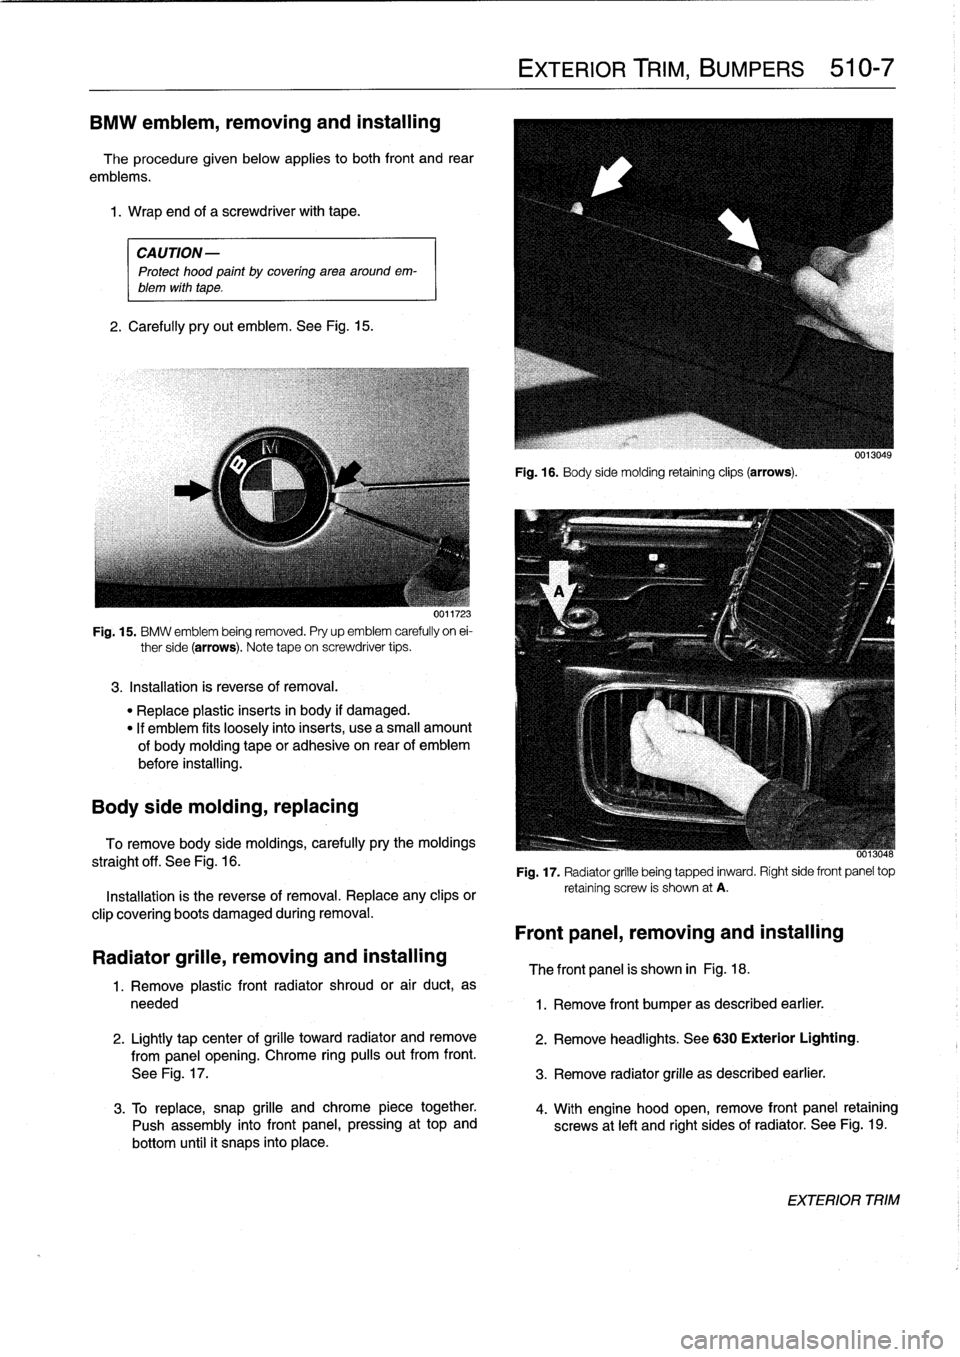 BMW 323i 1993 E36 Workshop Manual 
BMW
emblem,
removing
and
installing

The
procedure
given
below
applies
to
both
front
and
rear

emblems
.

1
.
Wrap
and
of
a
screwdriver
with
tape
.

CAUTION-

Protect
hood
paint
by
coveringarea
aroun